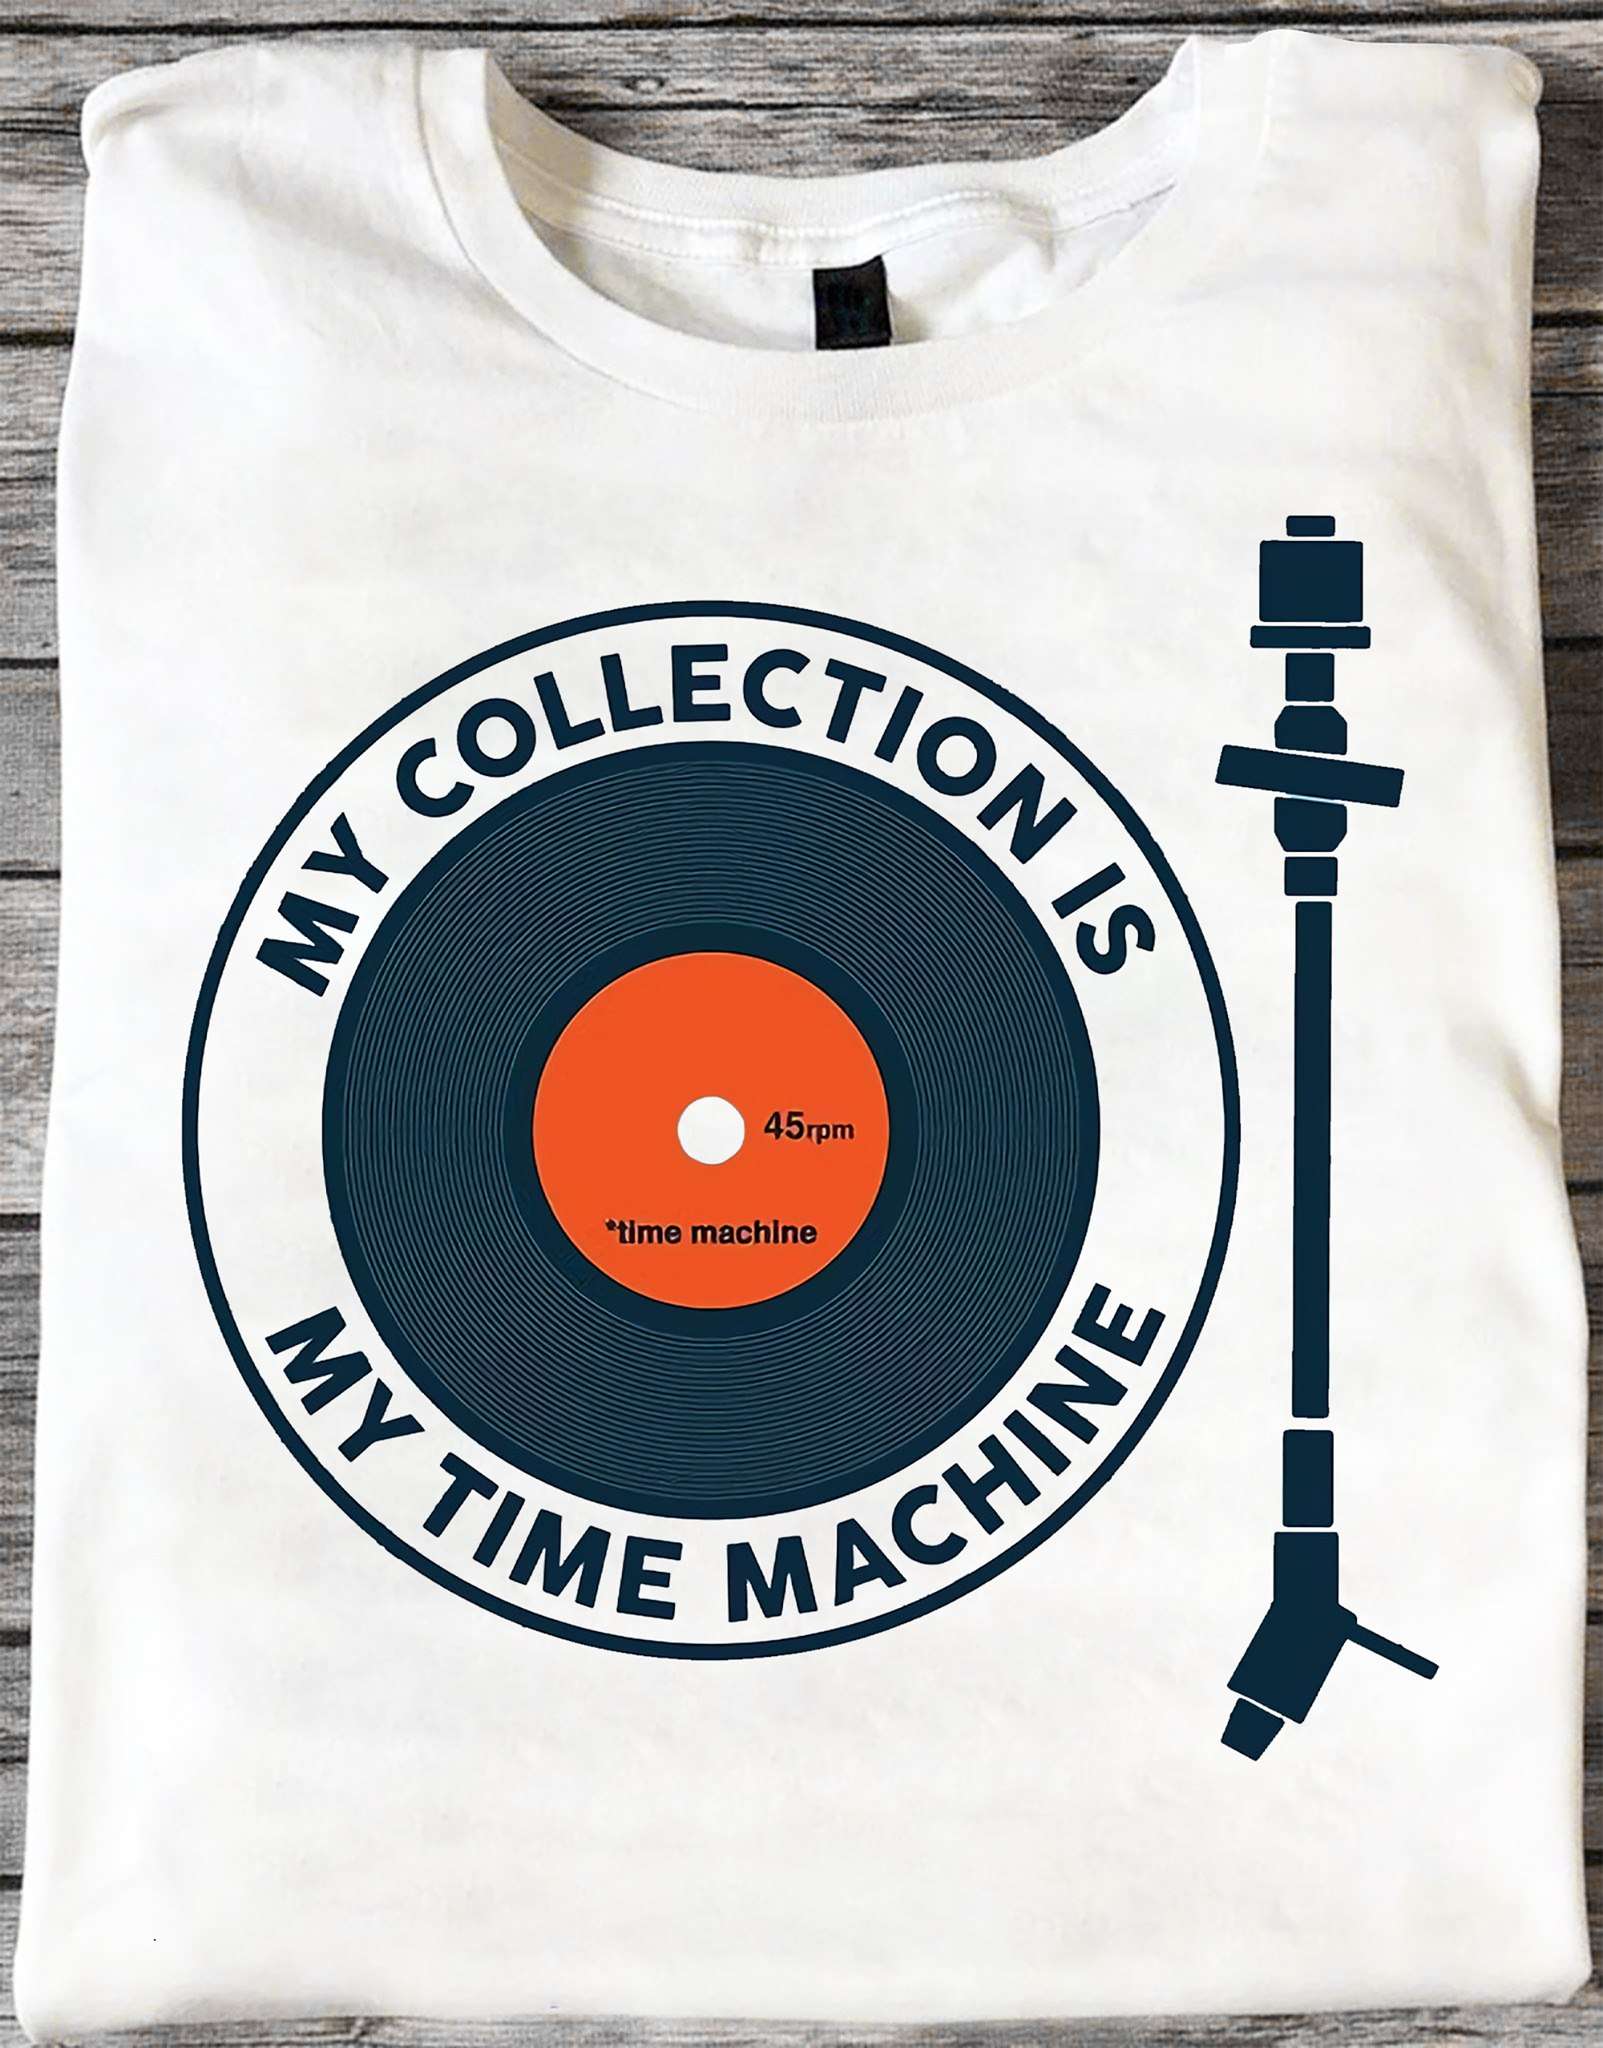 My collection is my time machine - Vinyl records lover, vinyl time machine